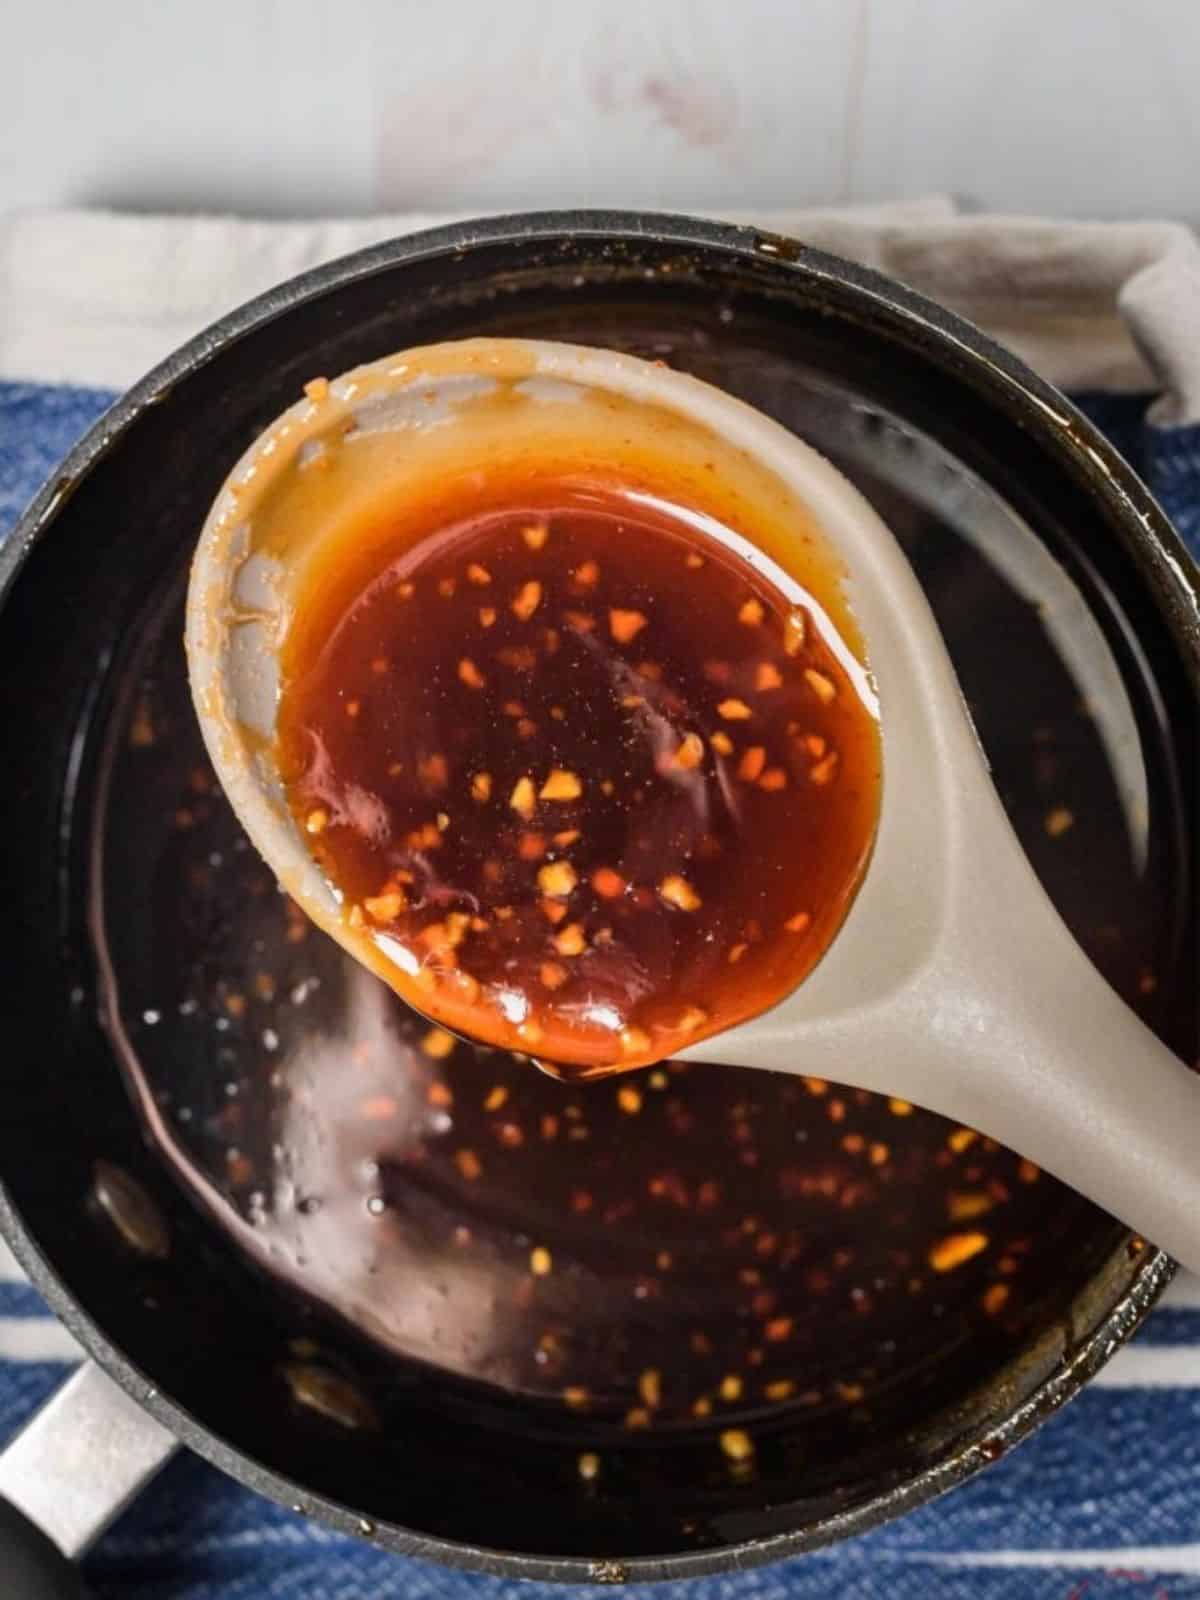 Honey Sriracha sauce in a skillet being picked up by a spoon.